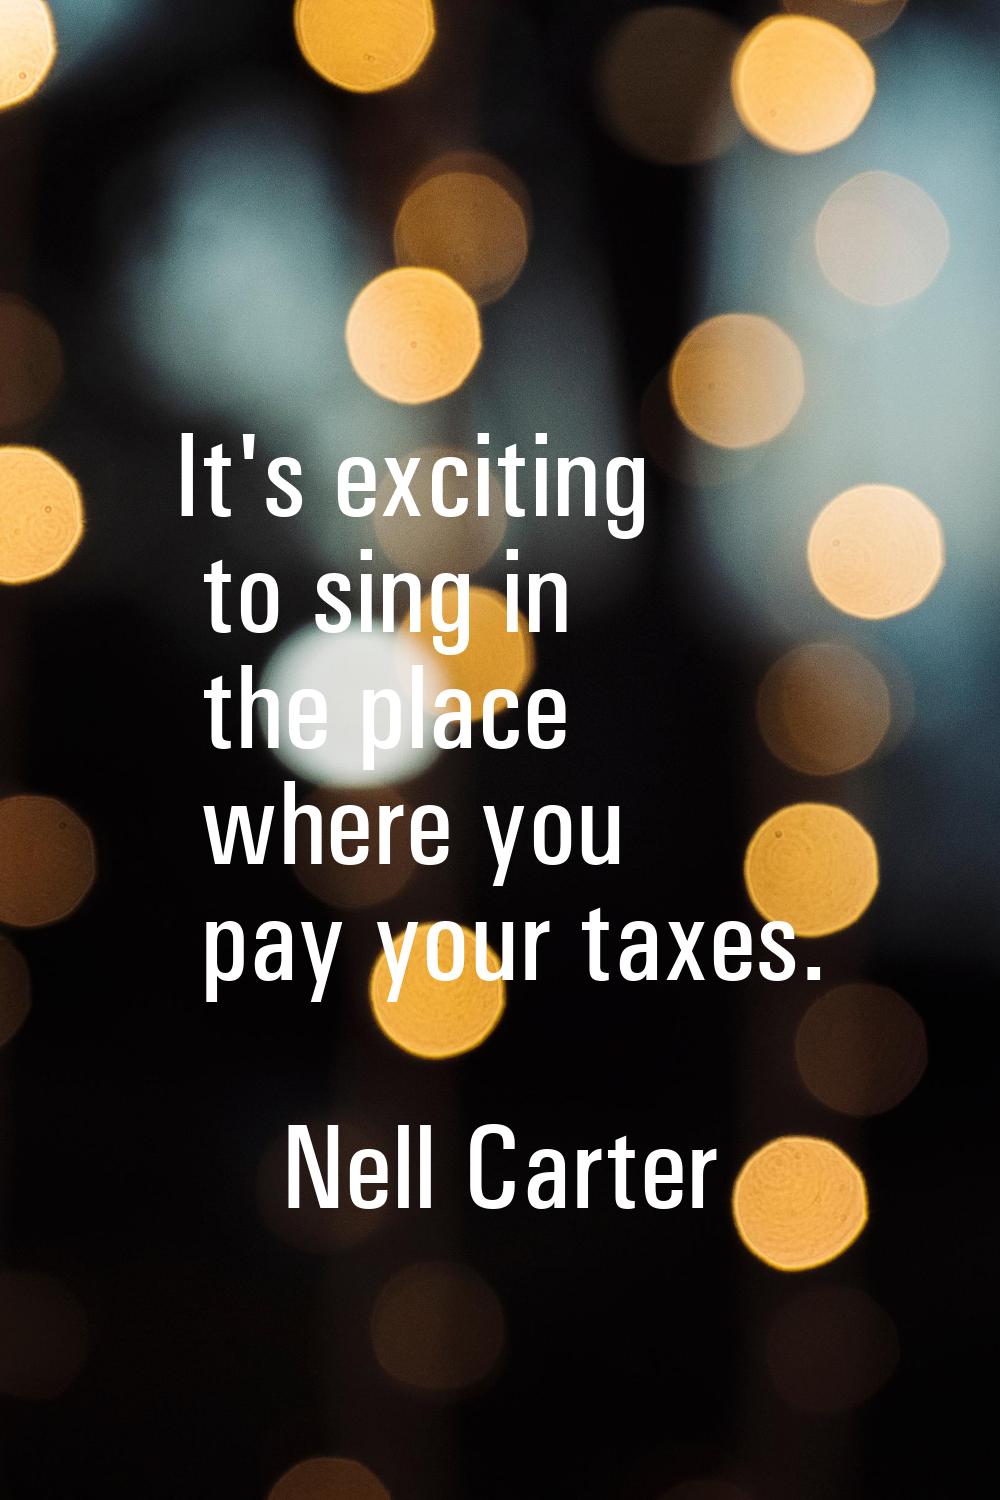 It's exciting to sing in the place where you pay your taxes.